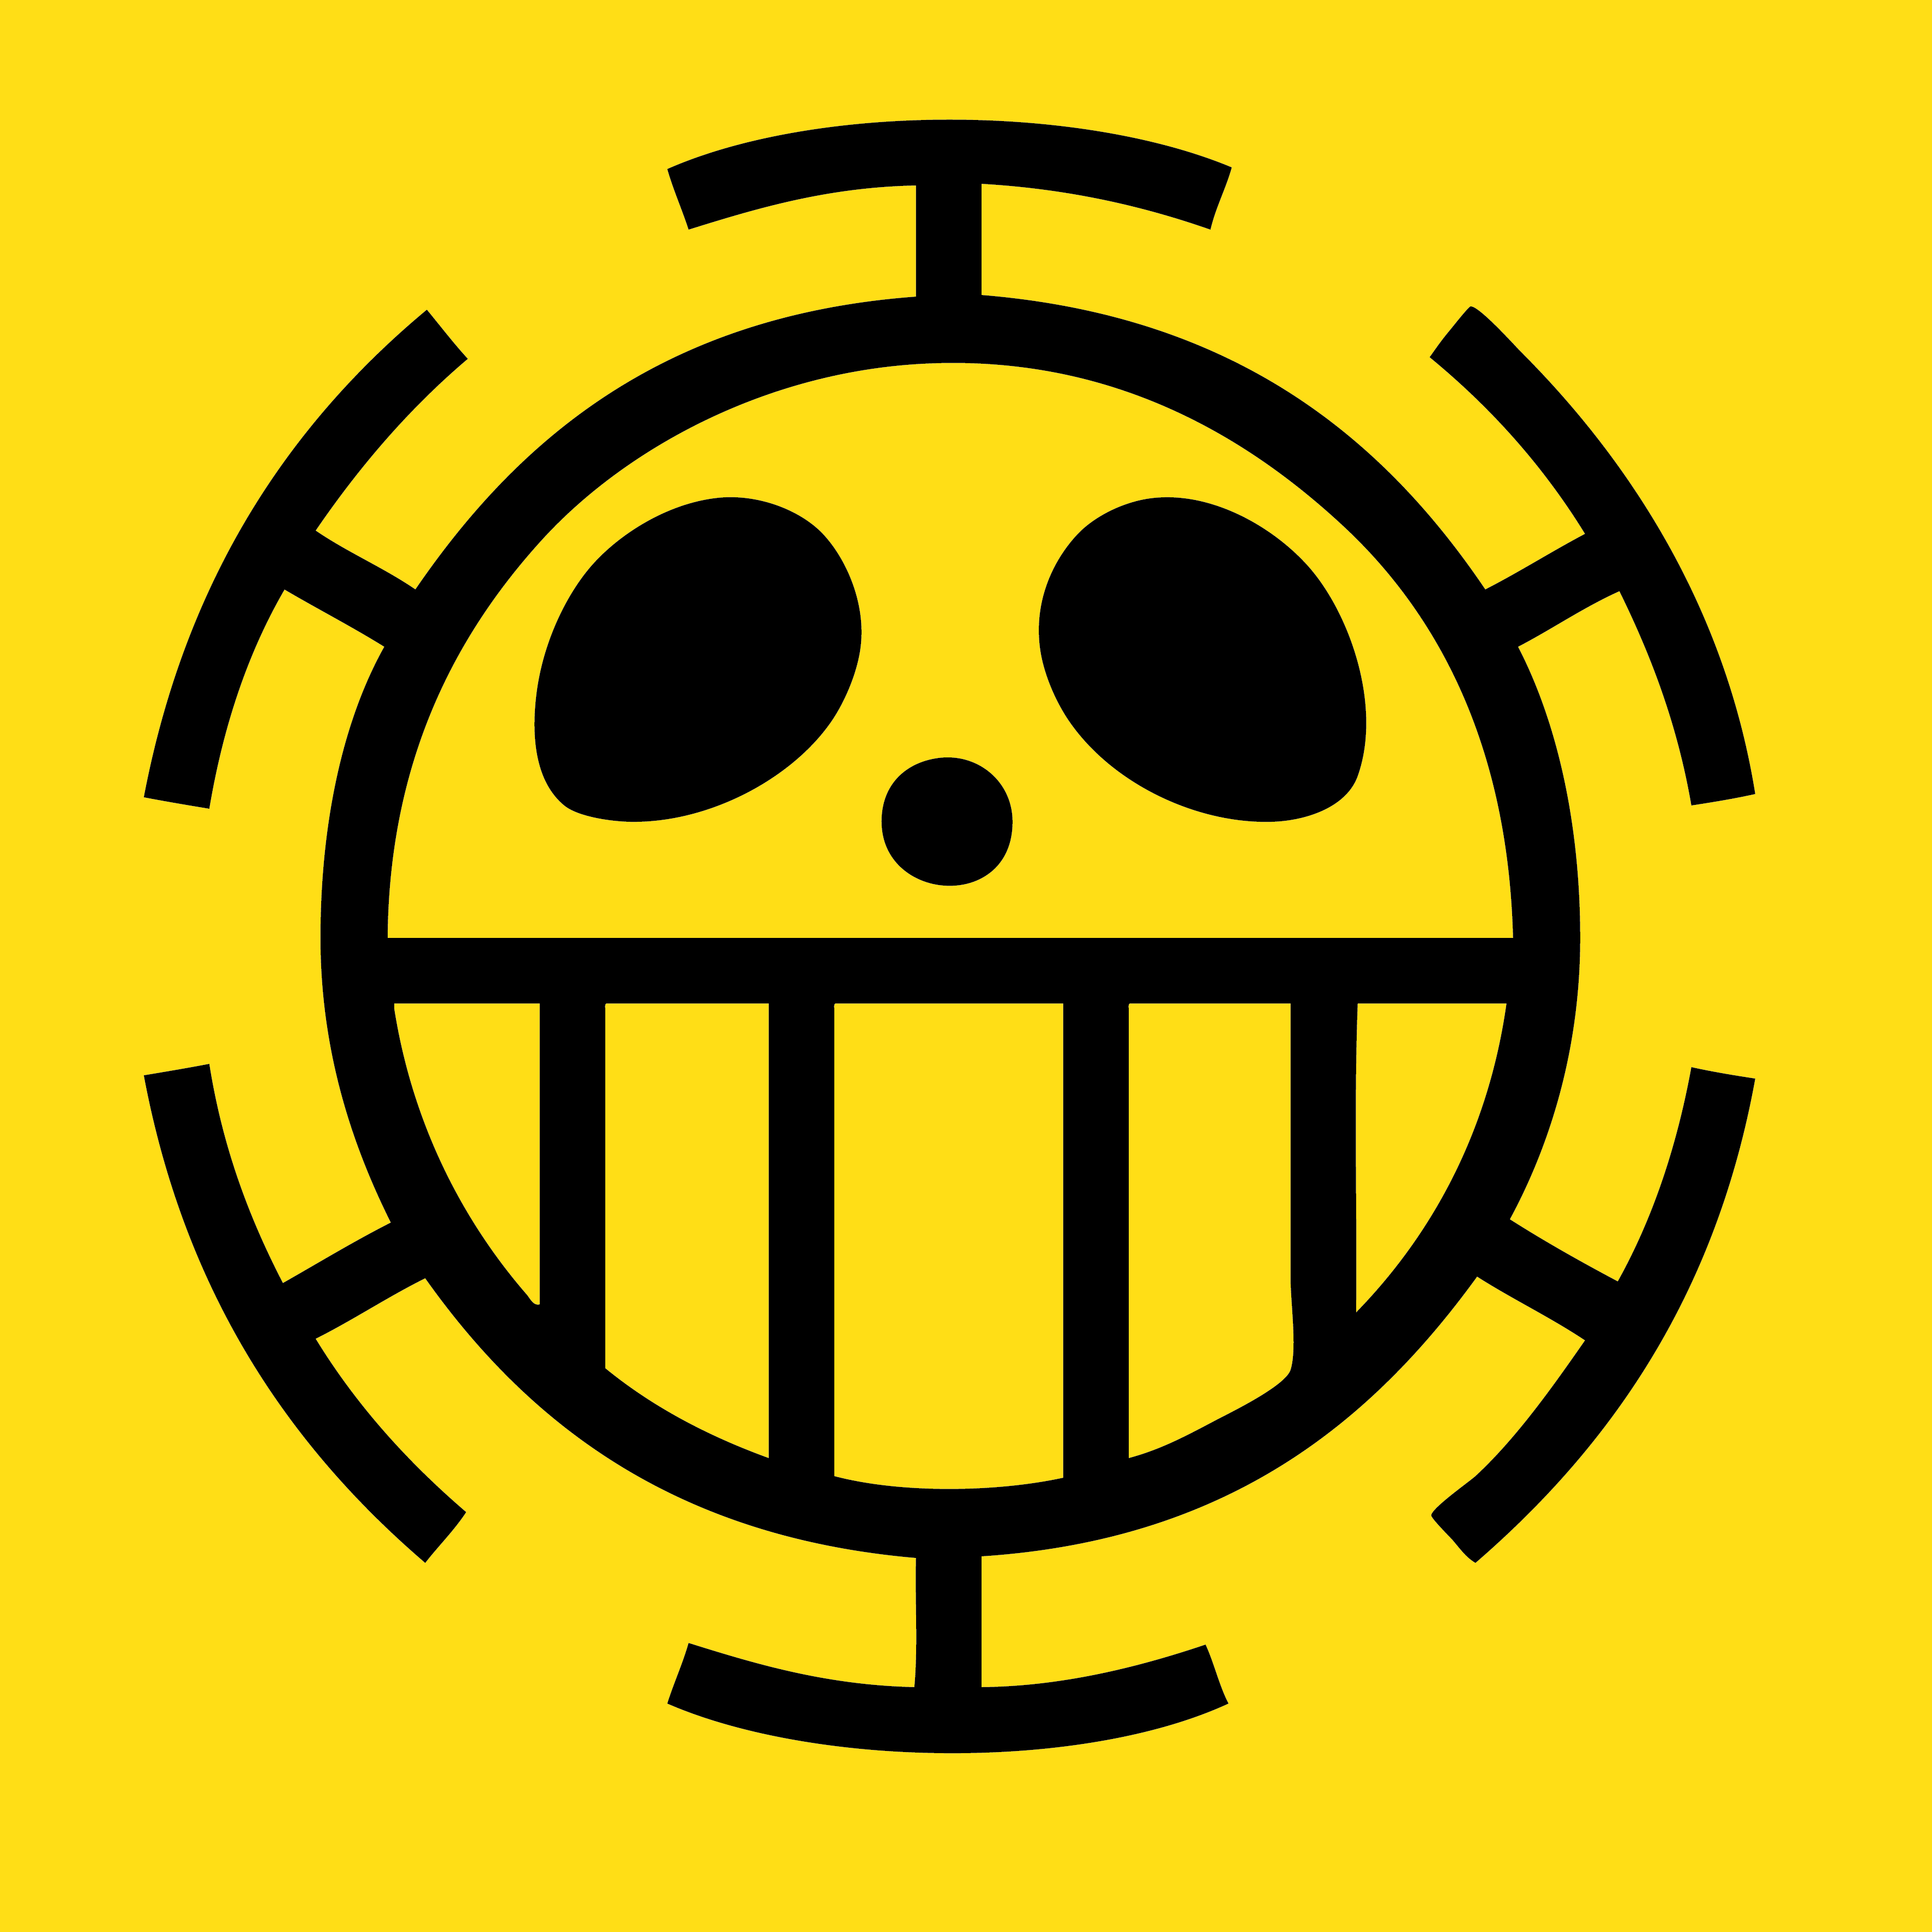 1000+ images about One Piece | Pirates, Trafalgar law ...